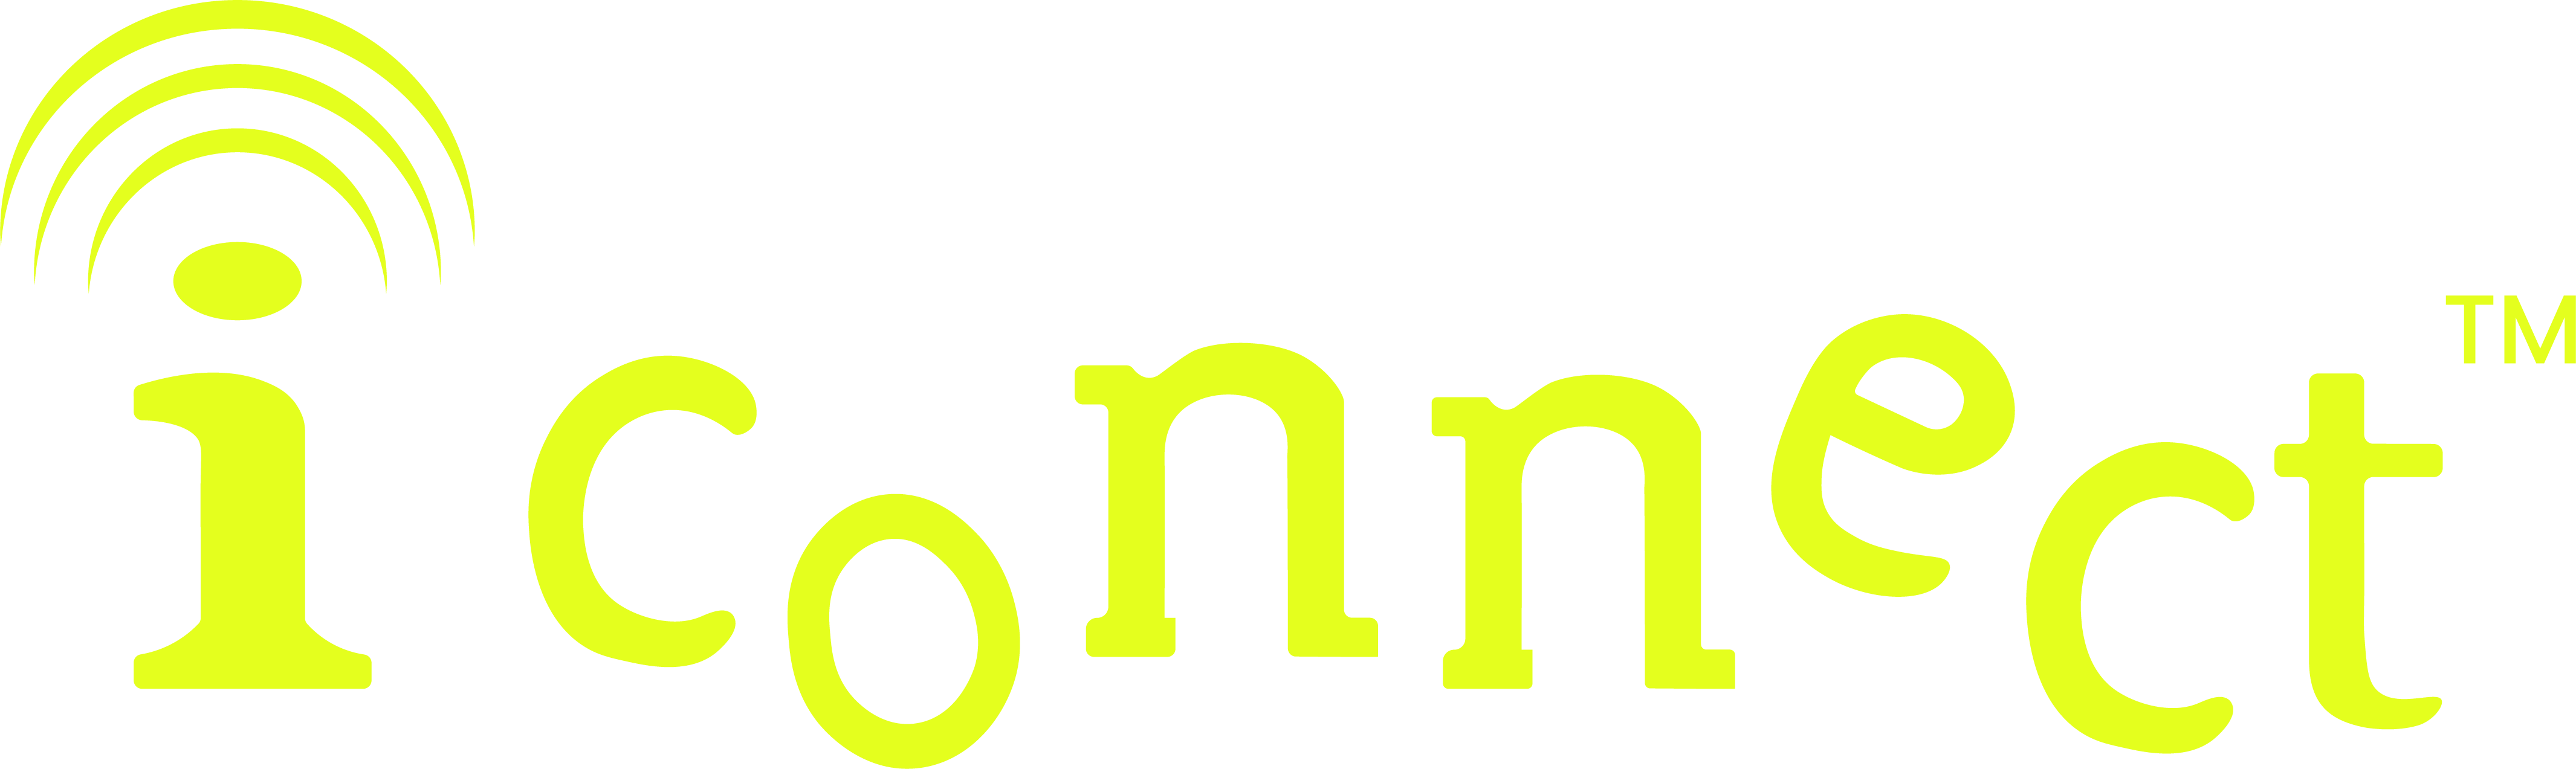 Iconnect-logo.png